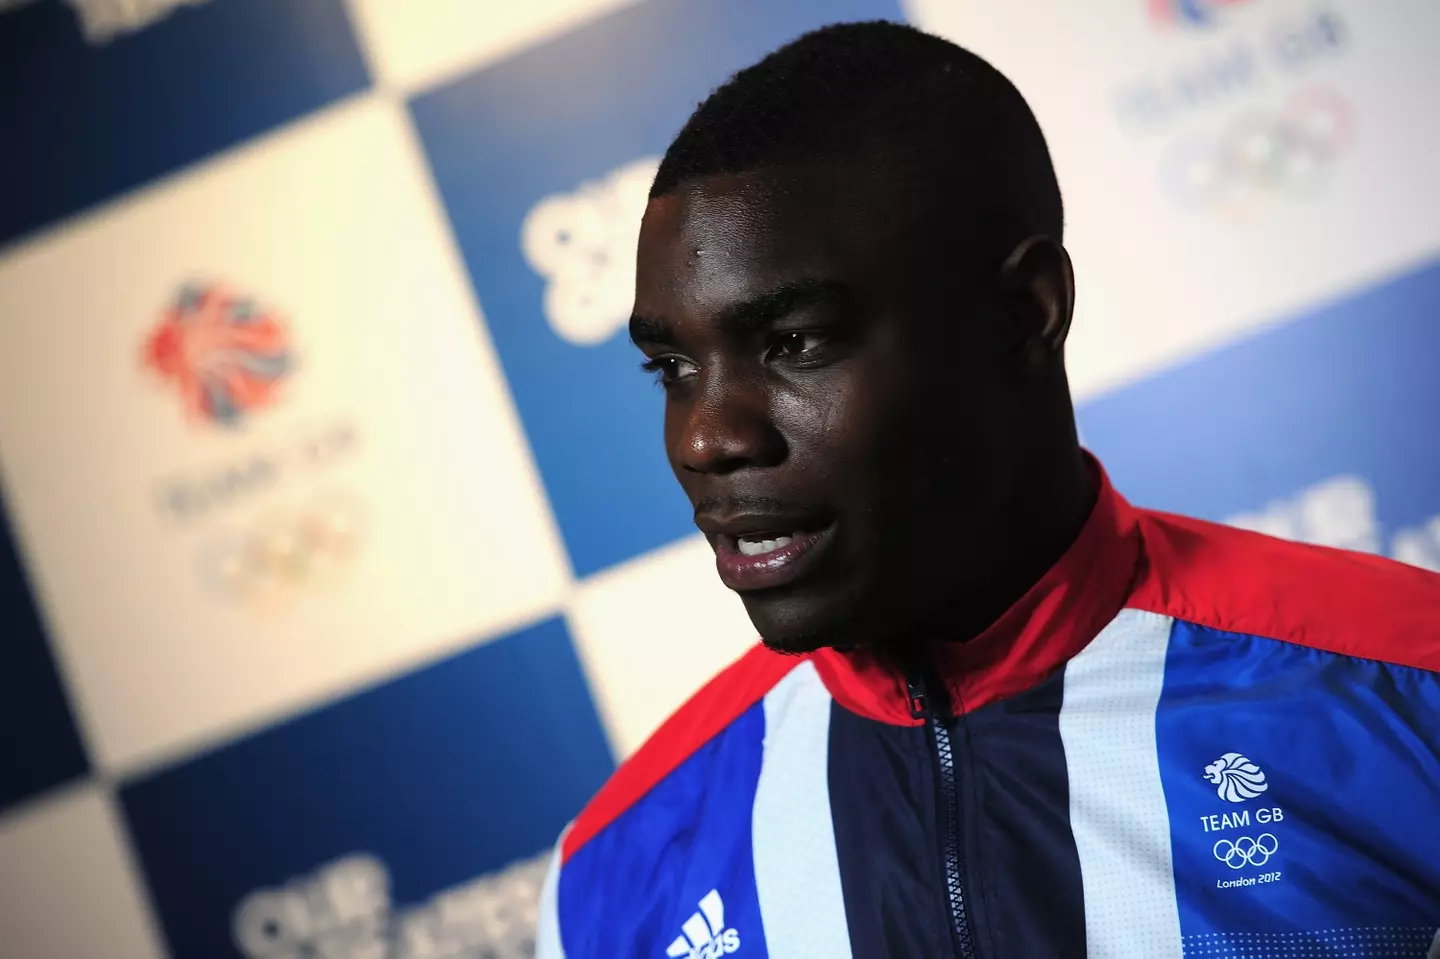 Micah Richards represented Team GB at the 2012 Olympics (